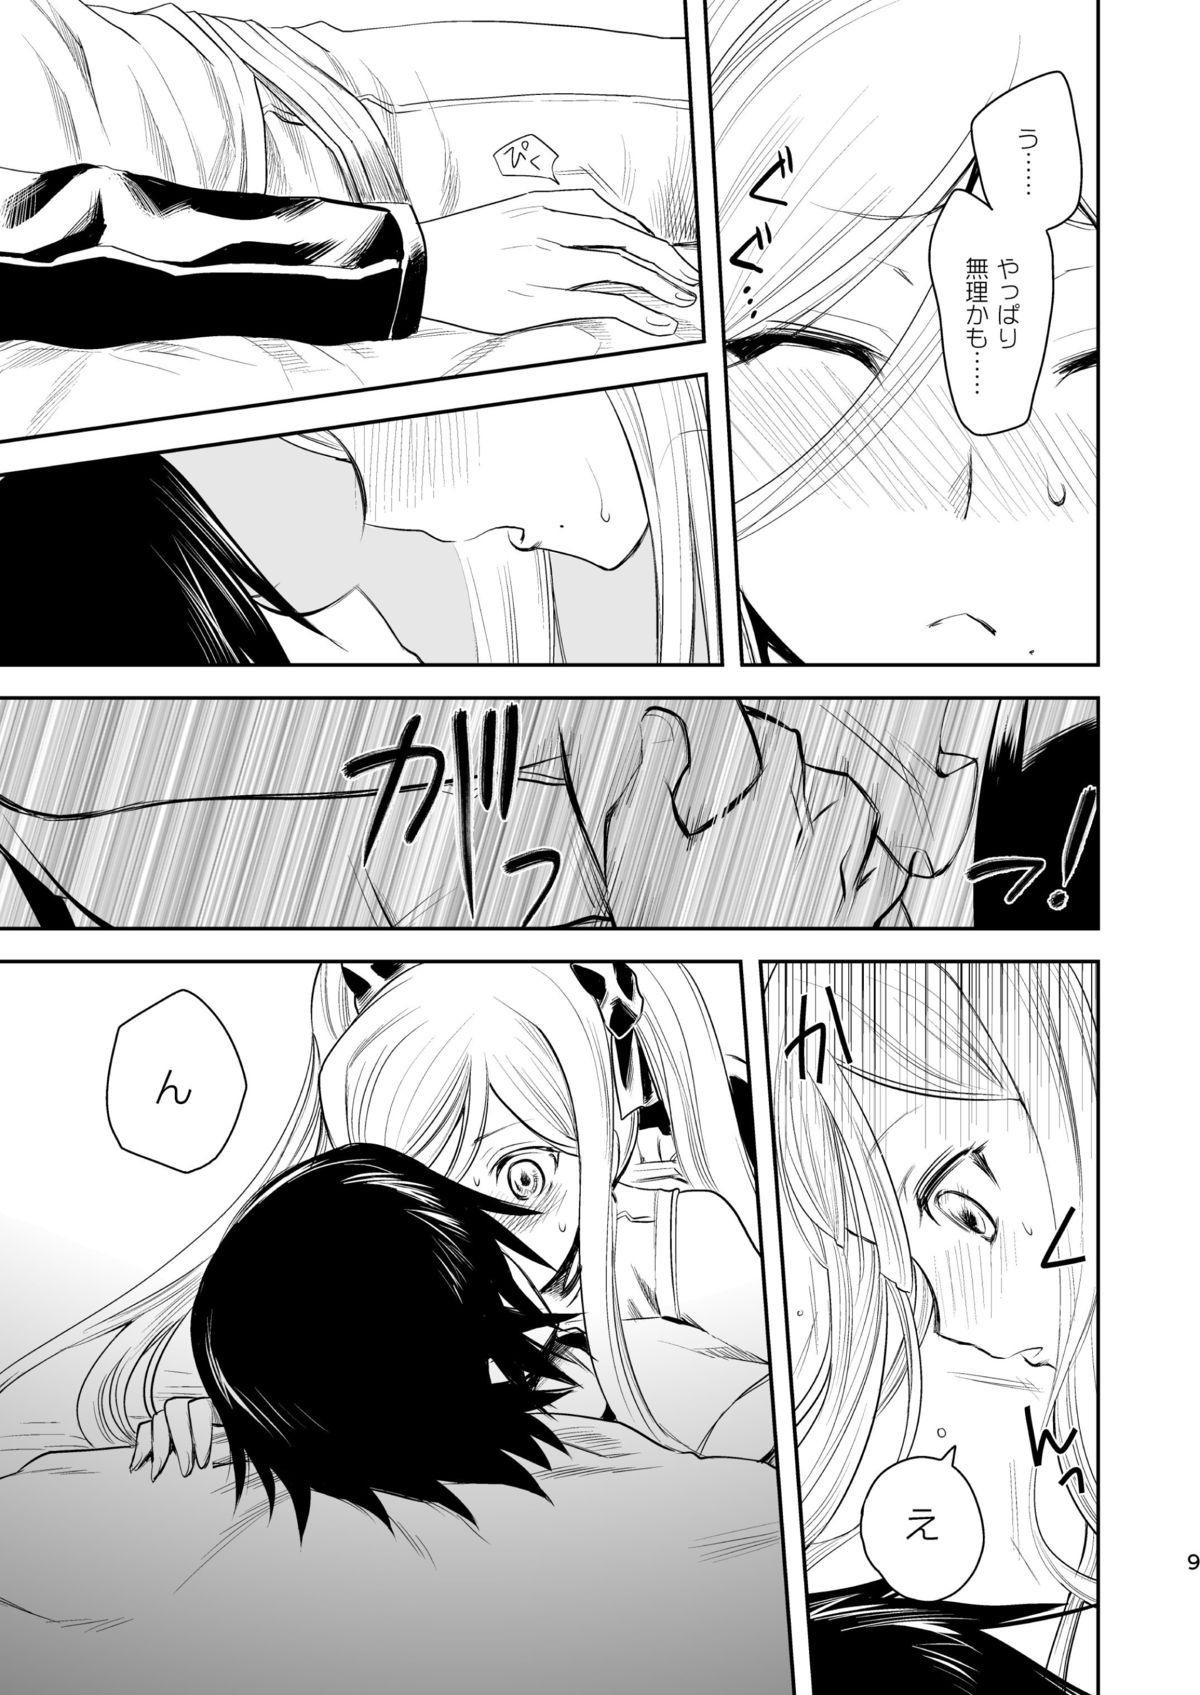 Sex Pussy Now Updating! - Arpeggio of blue steel Toilet - Page 8